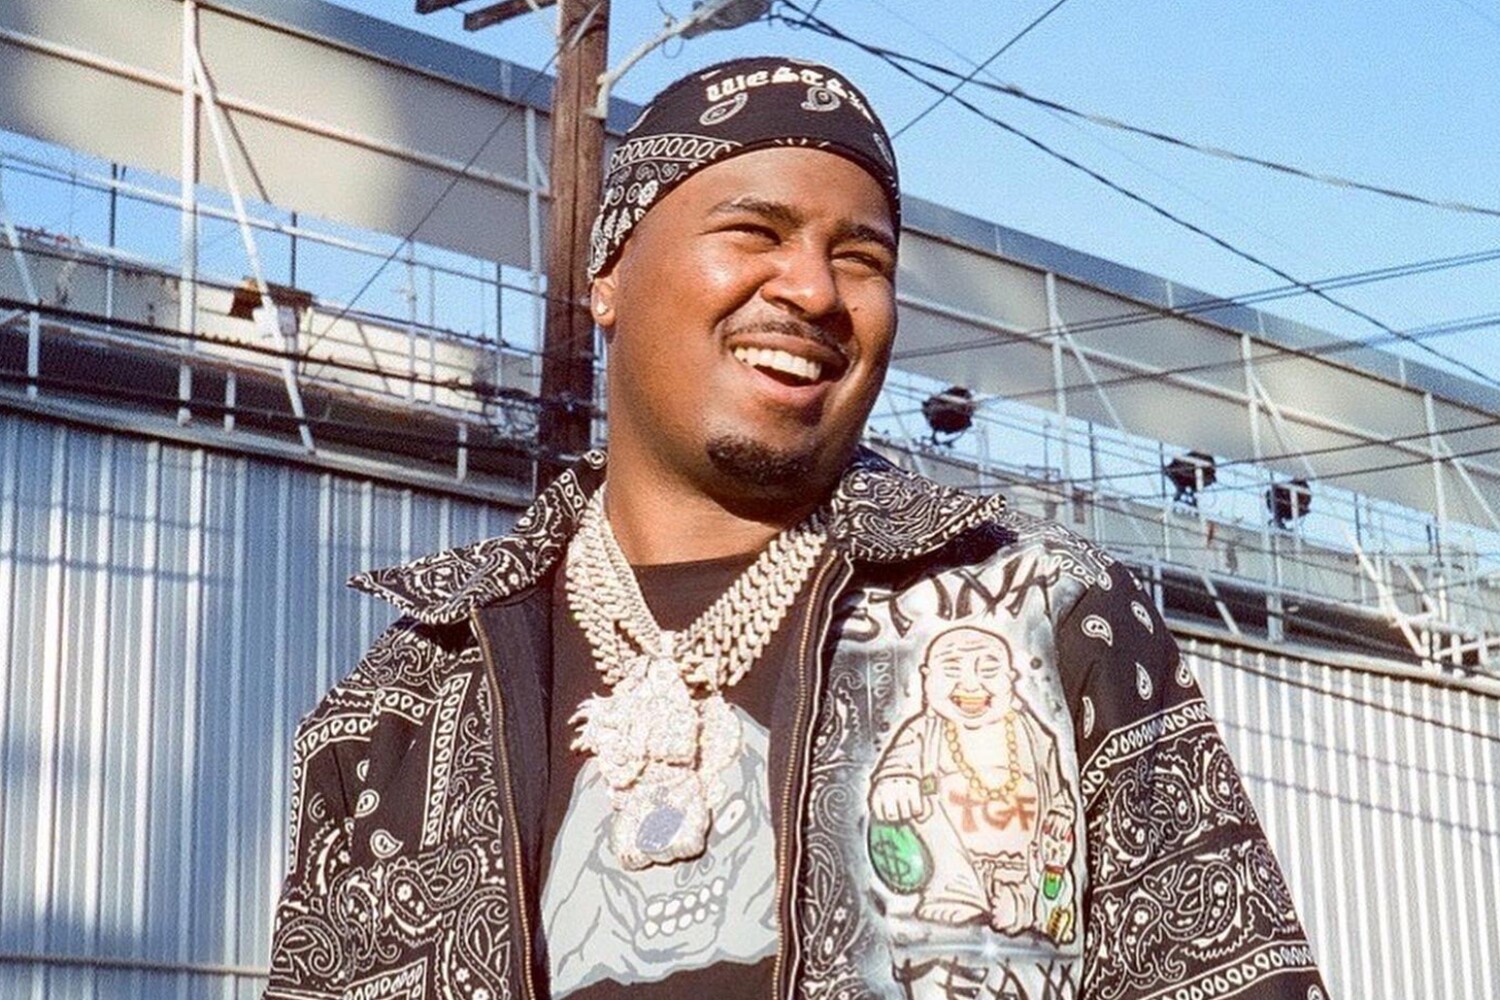 Drakeo the Ruler's family says lack of security at L.A. concert contributed to fatal stabbing